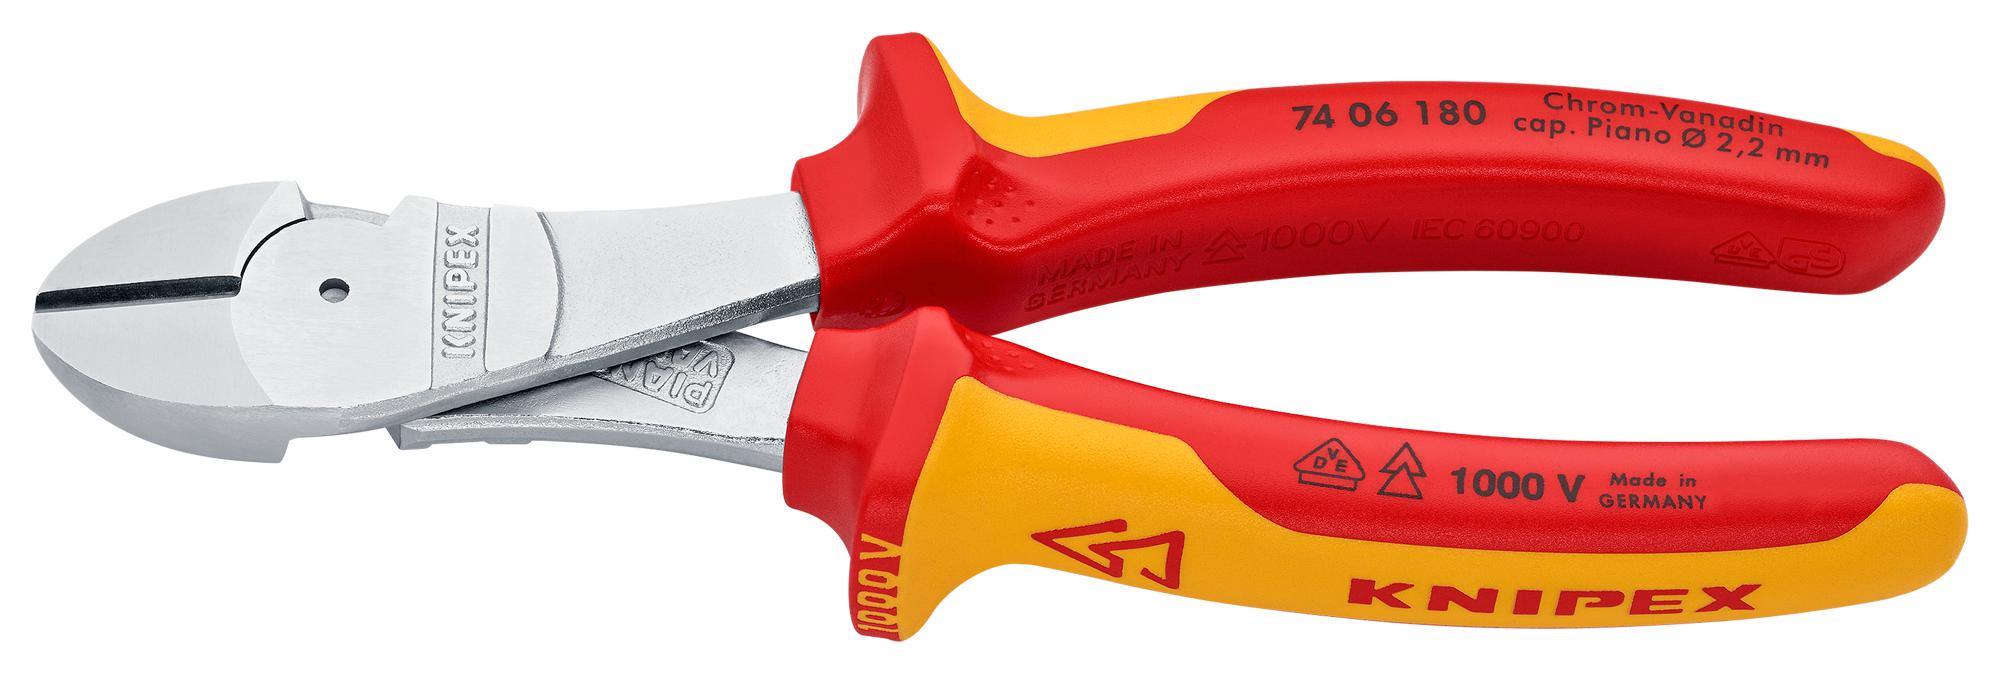 74 06 180 CUTTER, SIDE KNIPEX